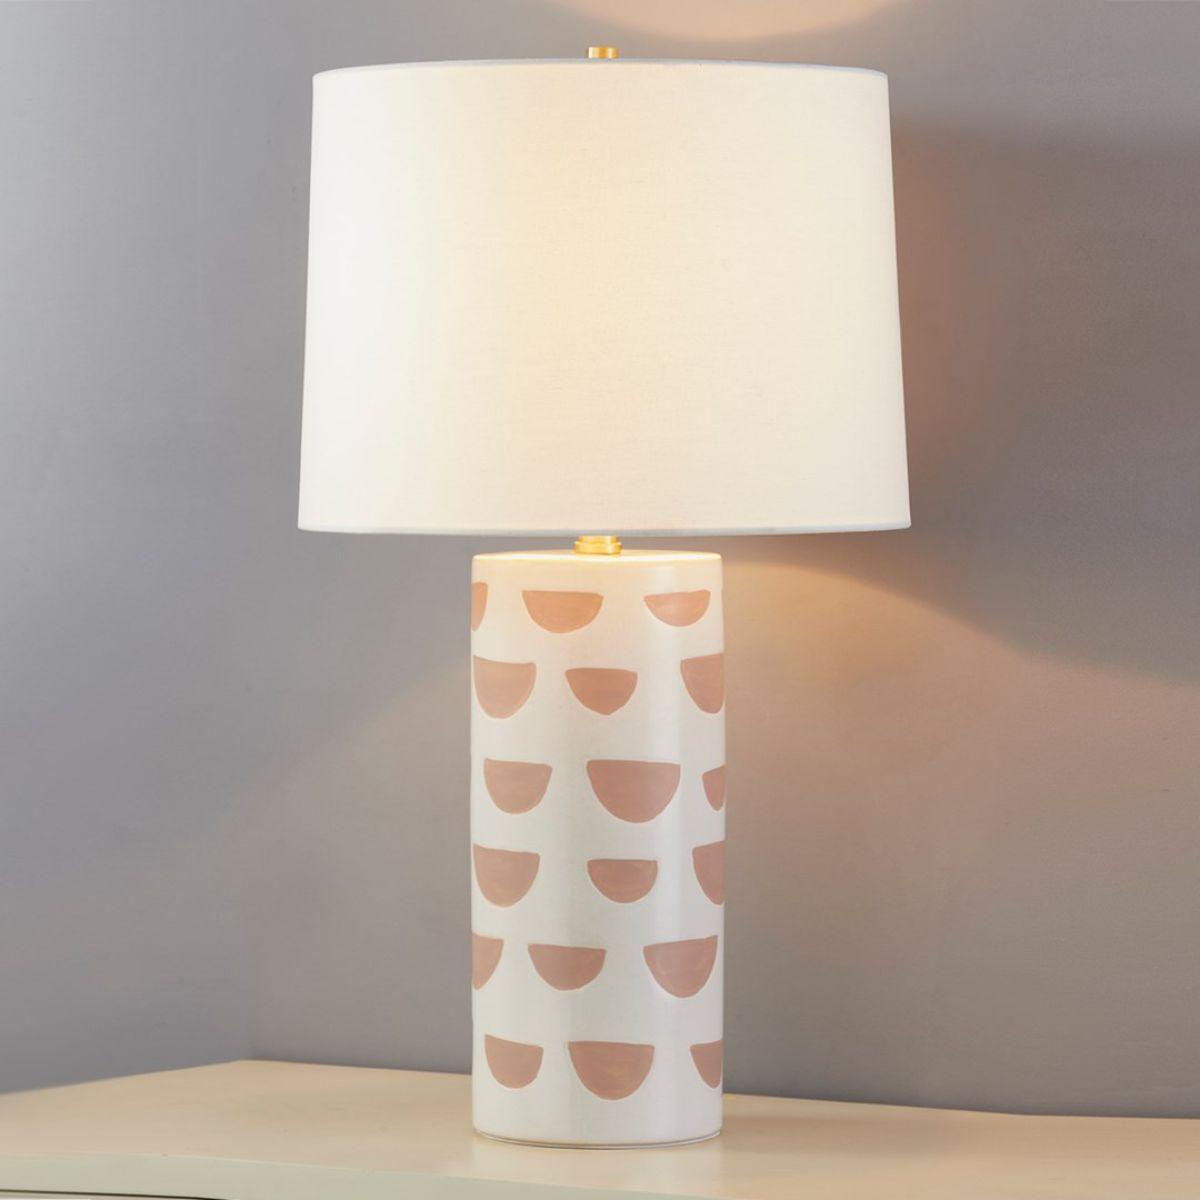 Minnie Tall Table Lamp Ceramic White Geometric Pattern with Aged Brass Accents